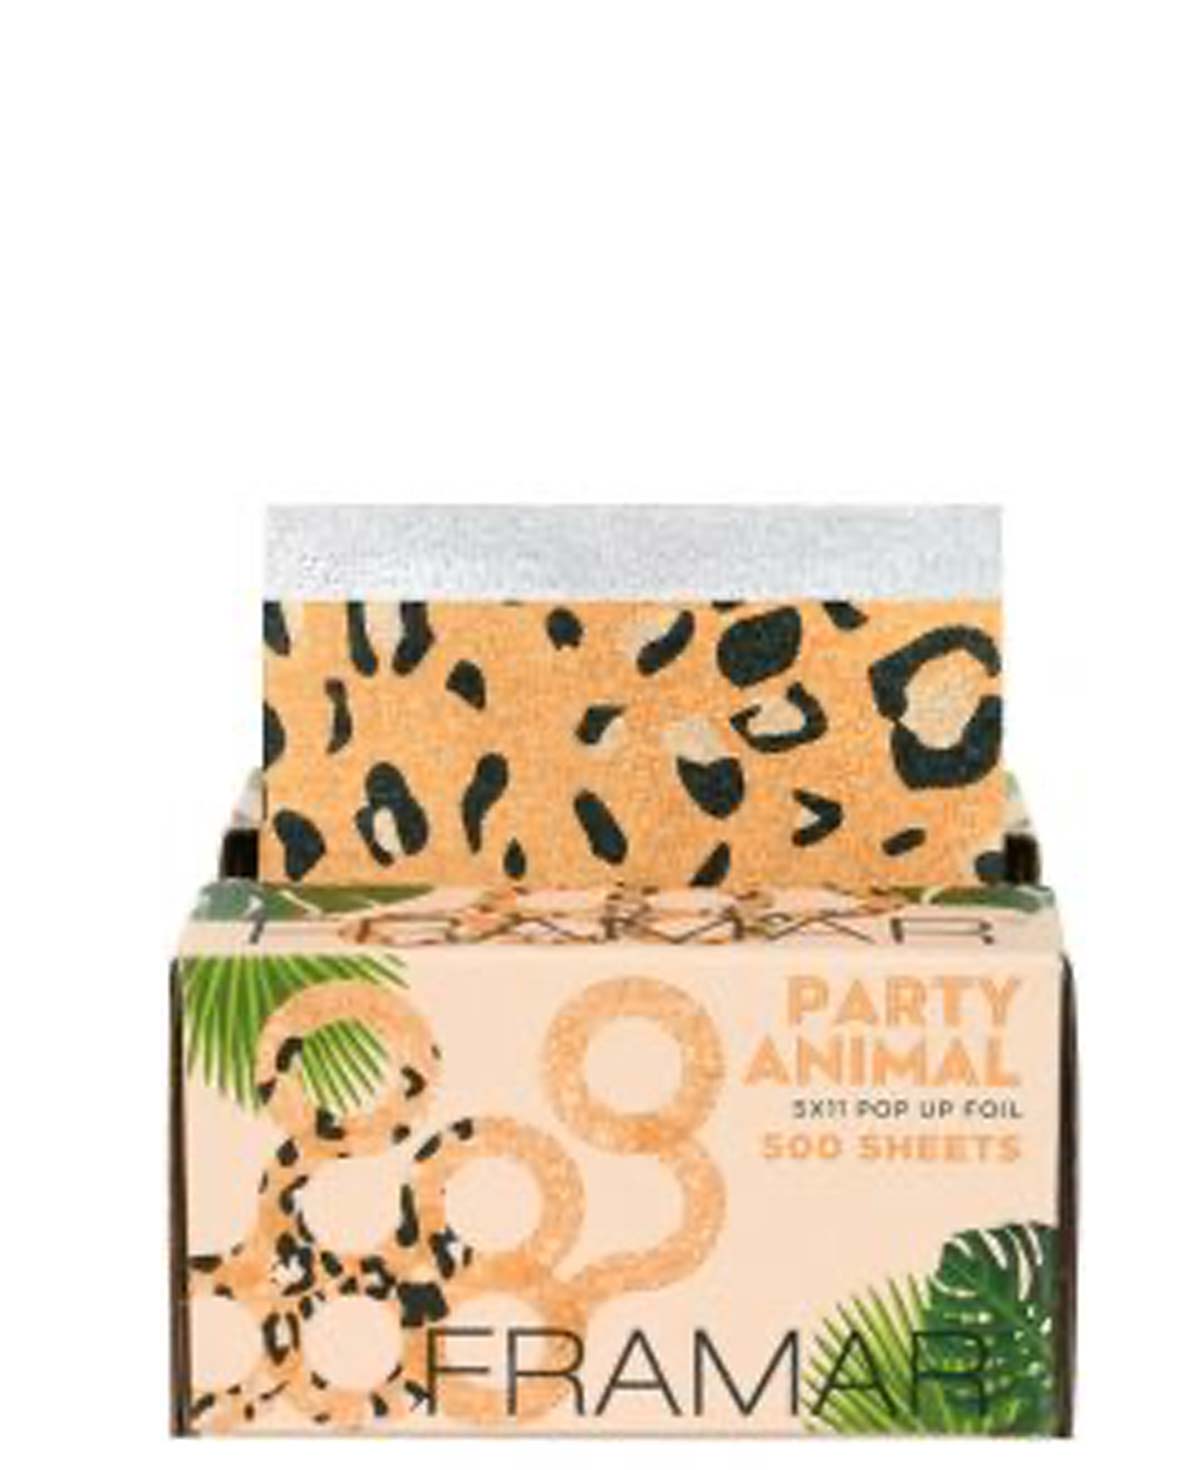 Framar 5x11 Pop Ups Party Animal  - 500 Sheets - Limited Edition